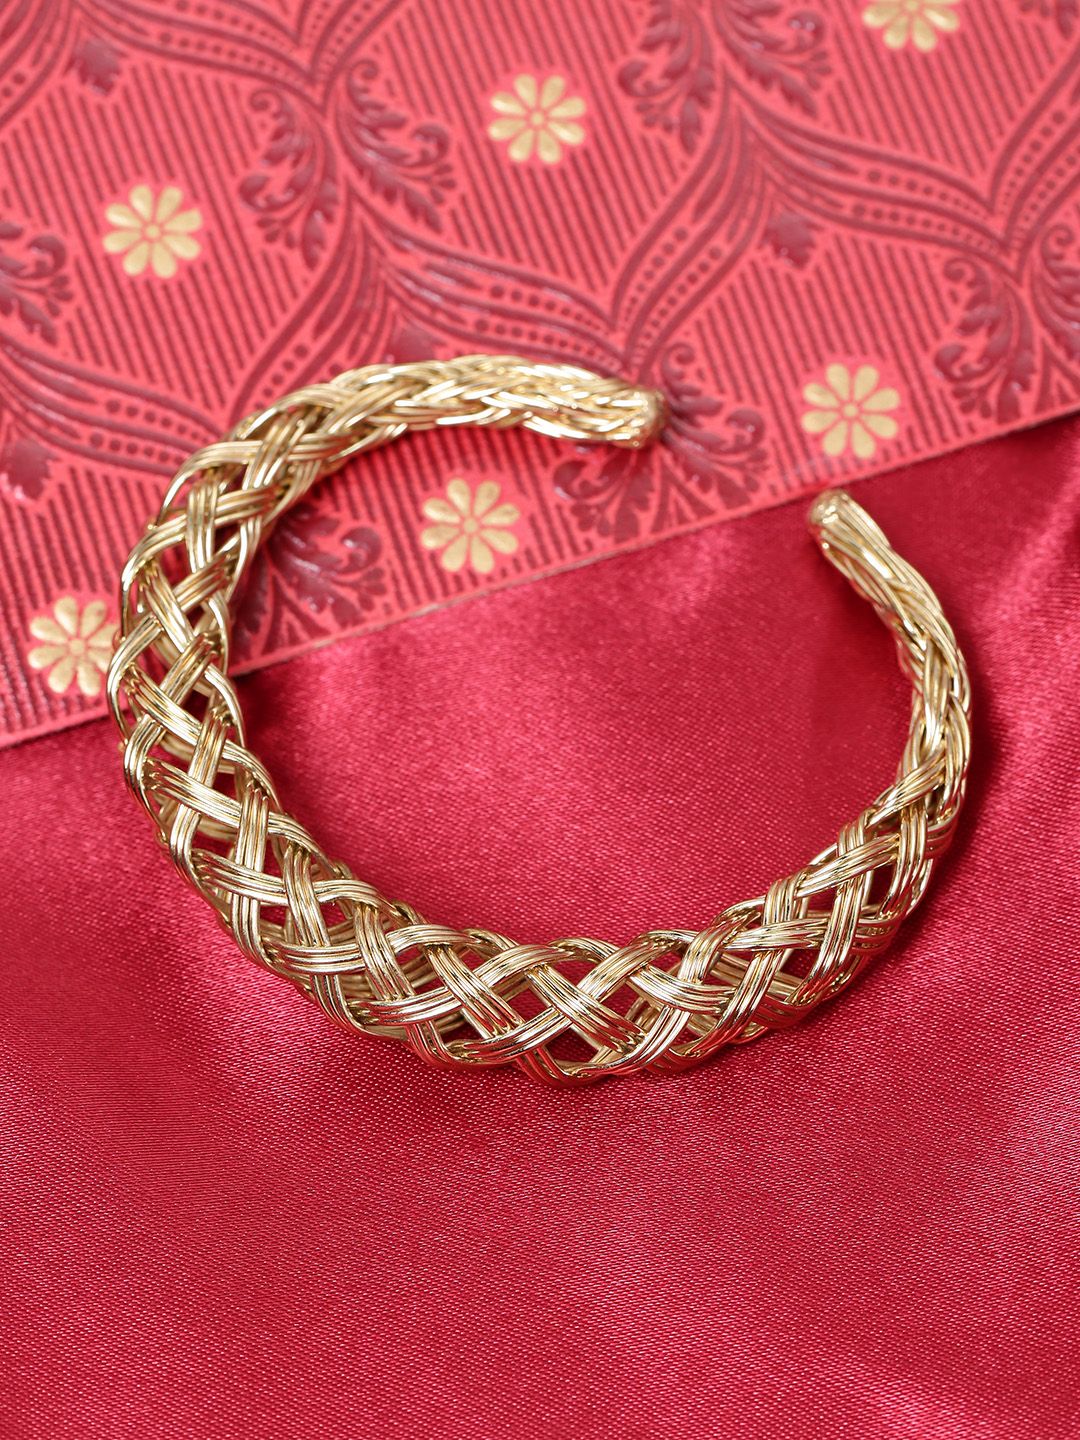 Priyaasi Gold-Plated Textured Handcrafted Kada Bracelet Price in India